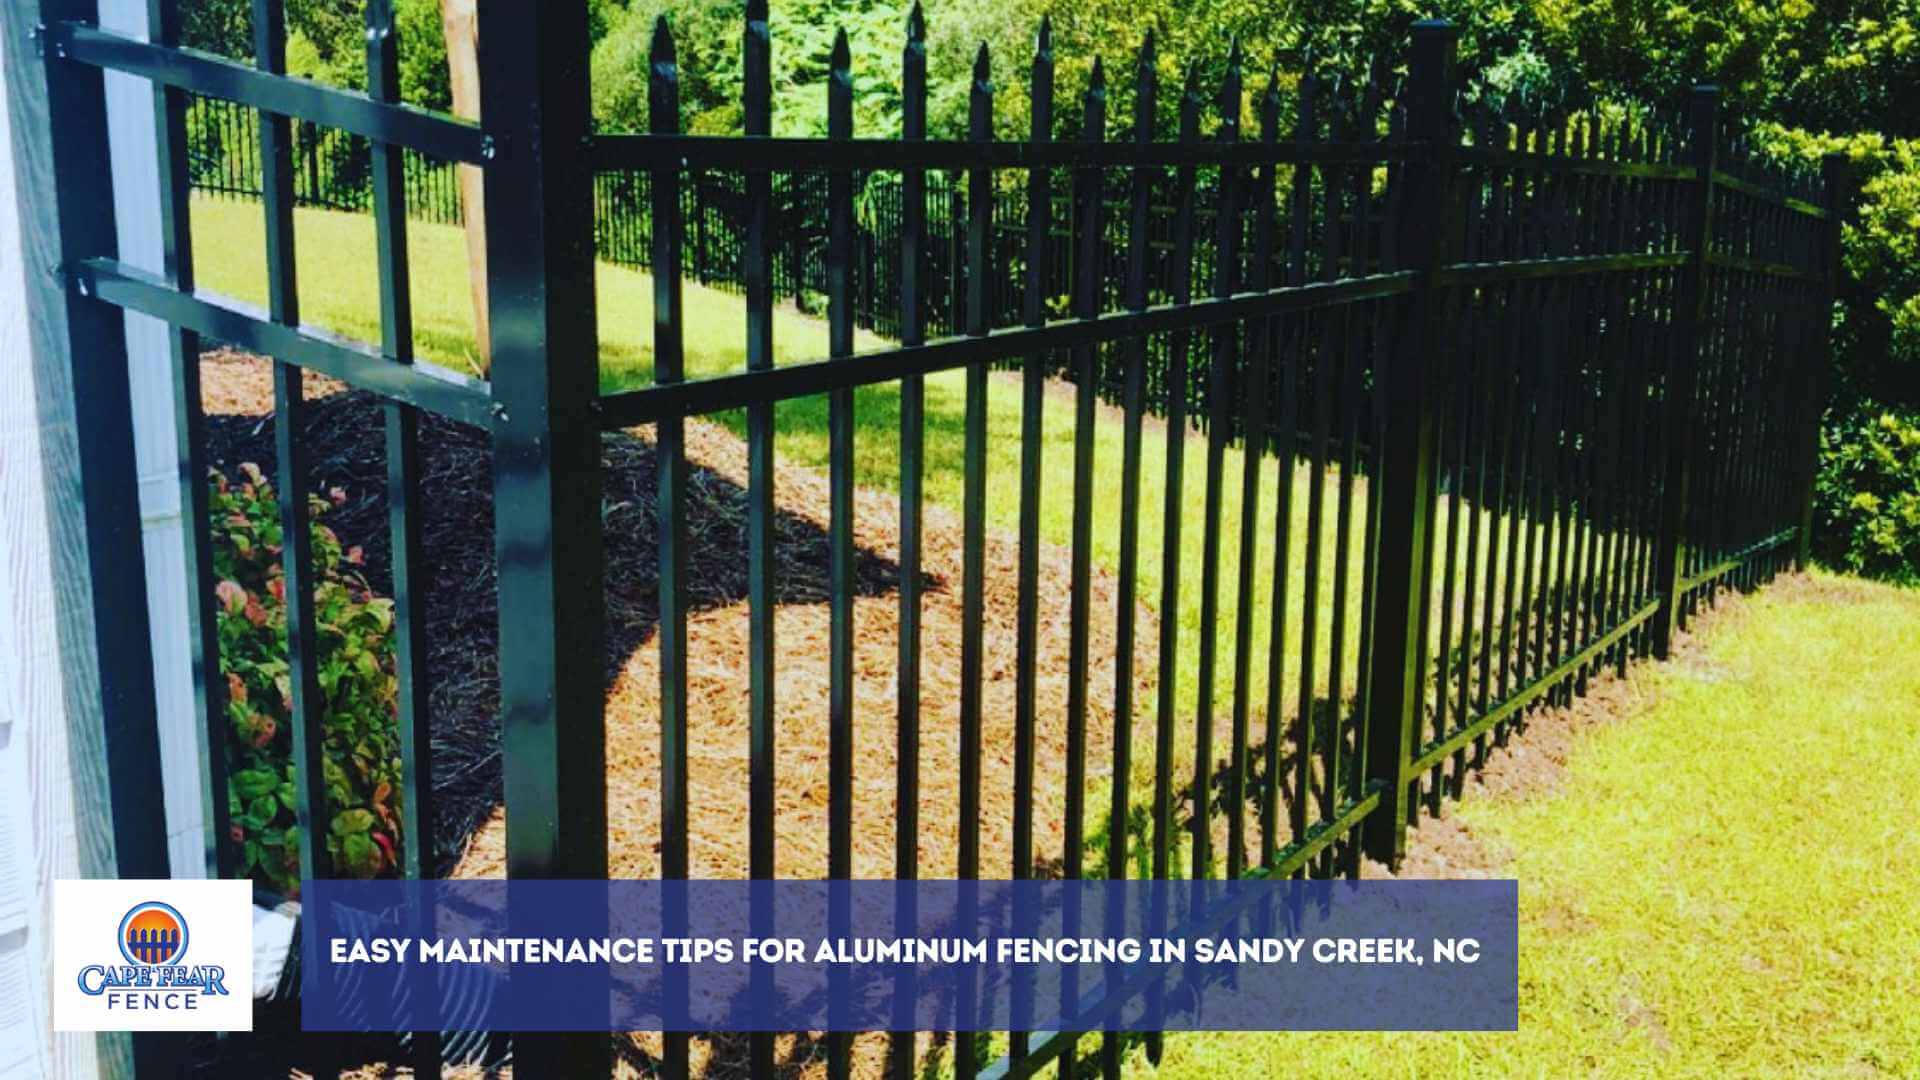 Easy Maintenance Tips for Aluminum Fencing in Sandy Creek, NC